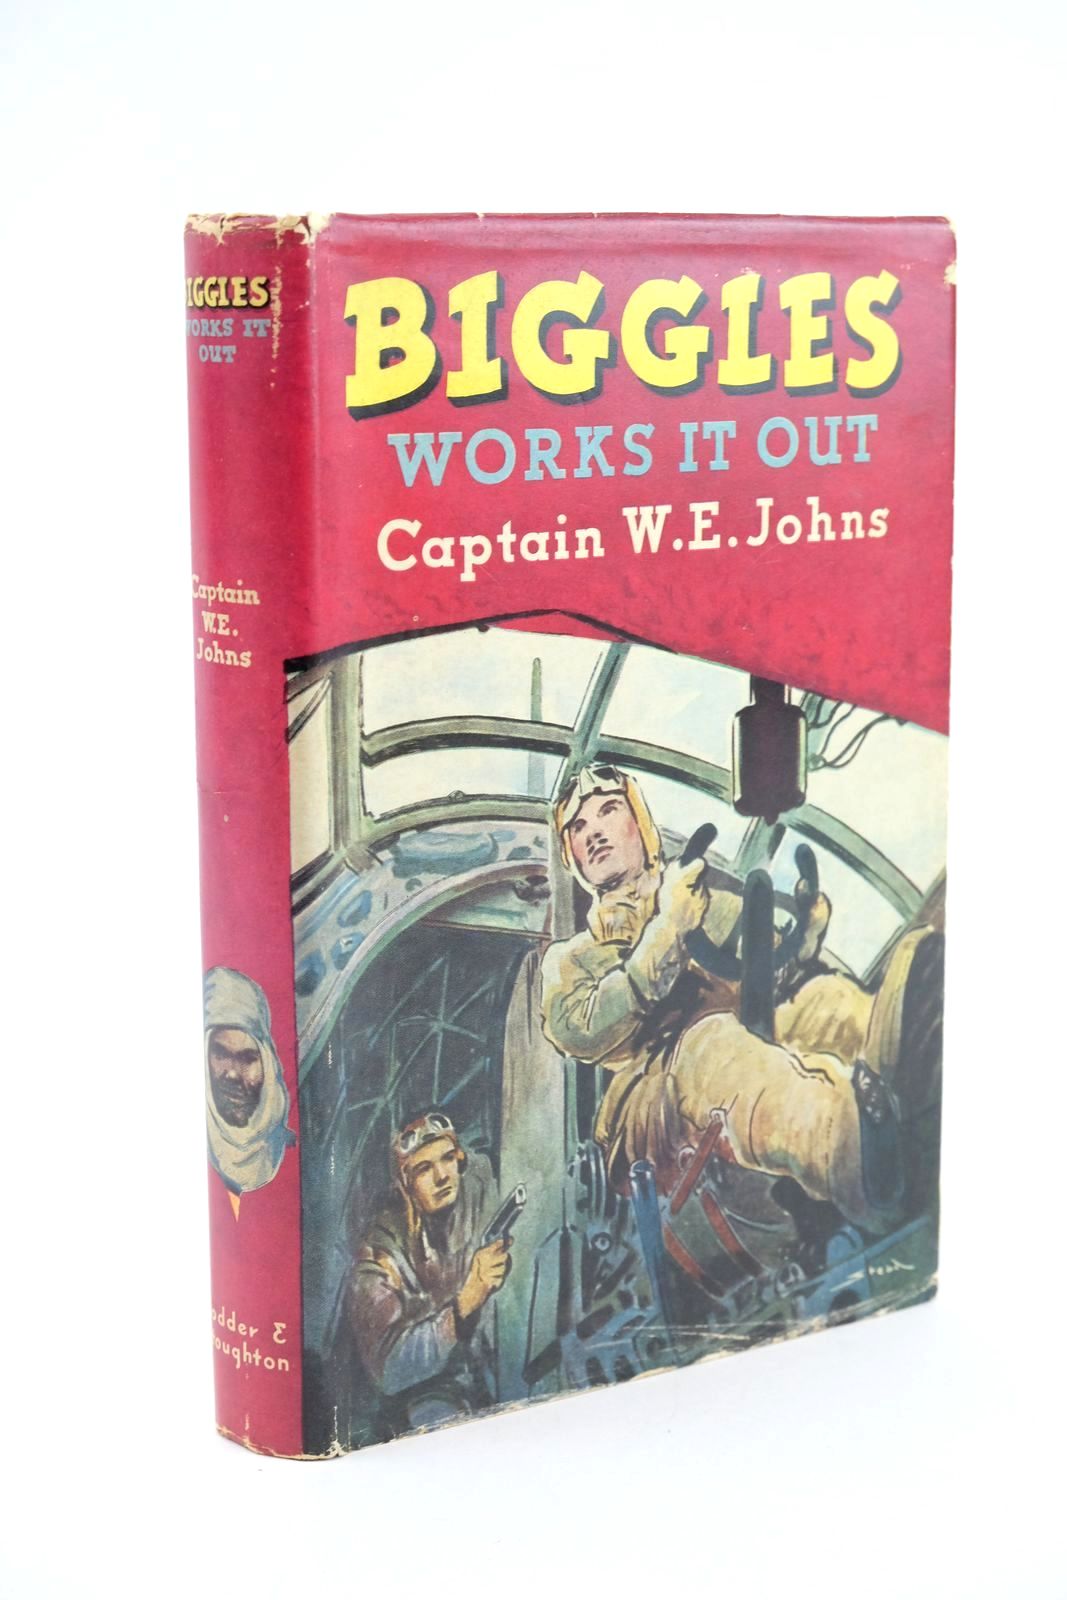 Photo of BIGGLES WORKS IT OUT written by Johns, W.E. illustrated by Stead,  published by Hodder & Stoughton (STOCK CODE: 1323850)  for sale by Stella & Rose's Books